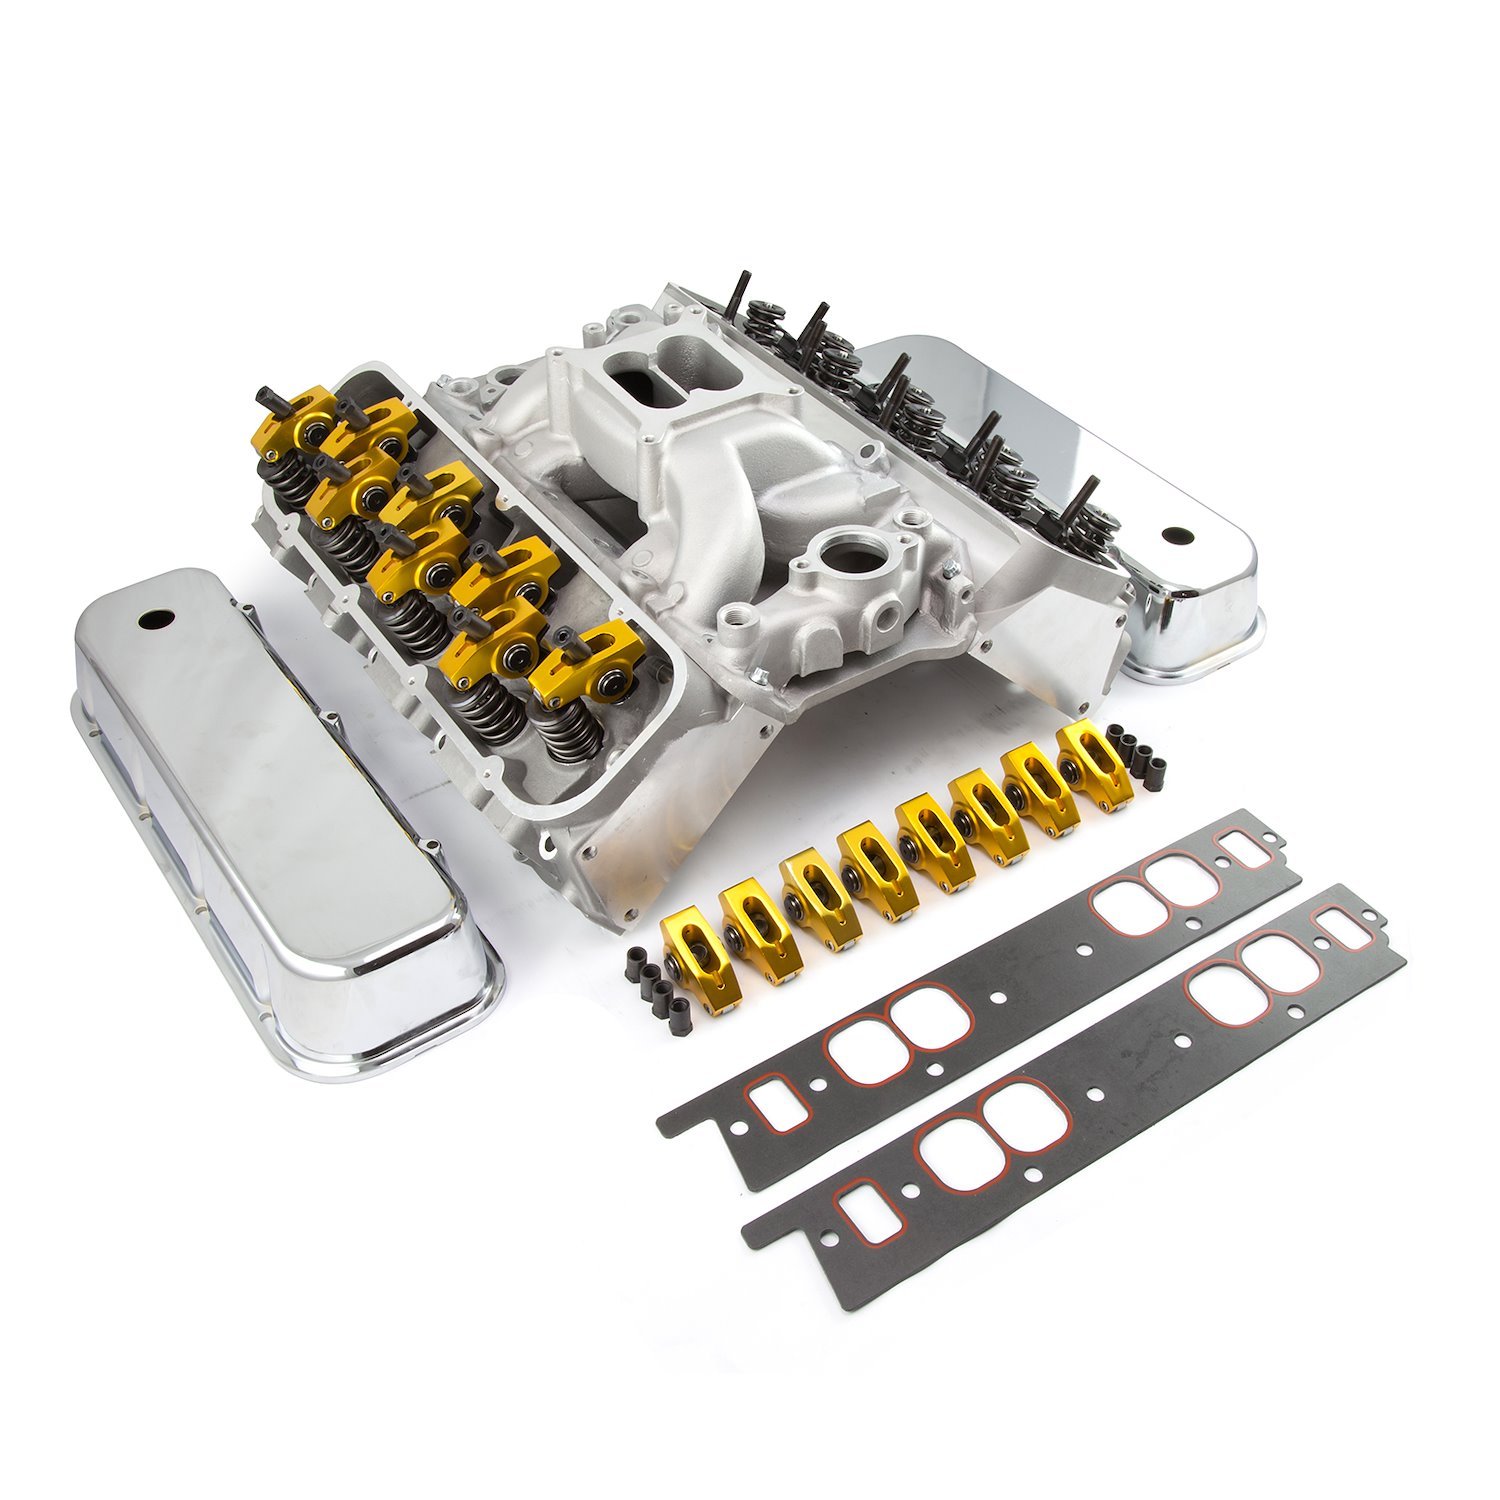 Chevy BBC 396 Solid Flat Tappet Top End Engine Kit